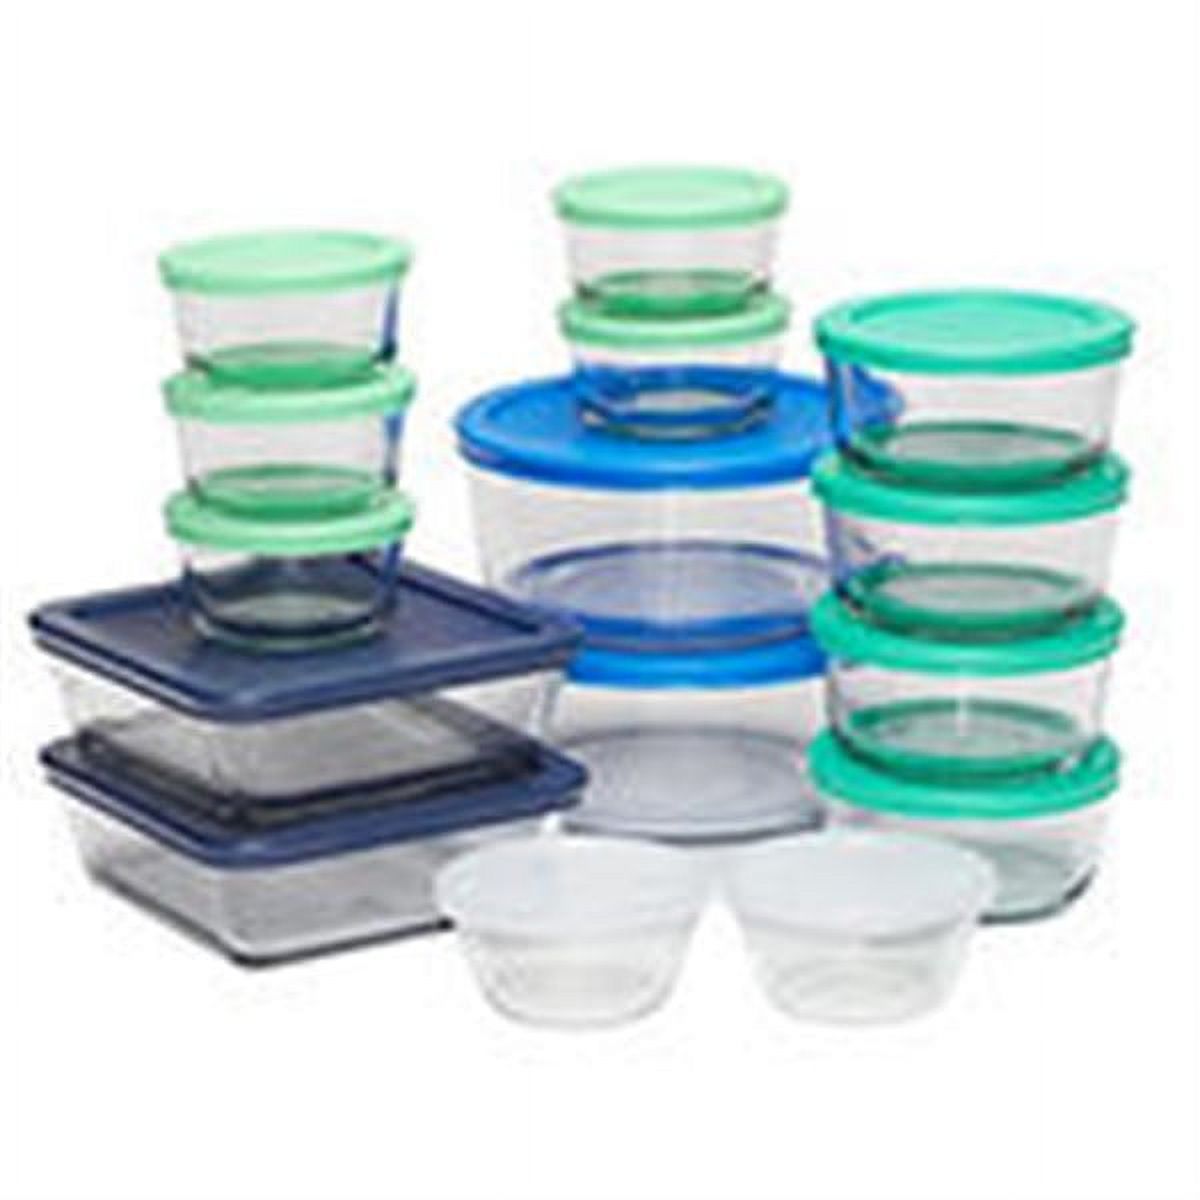 HOMBERKING 10 Pack Glass Meal Prep Containers, Food Storage Blue